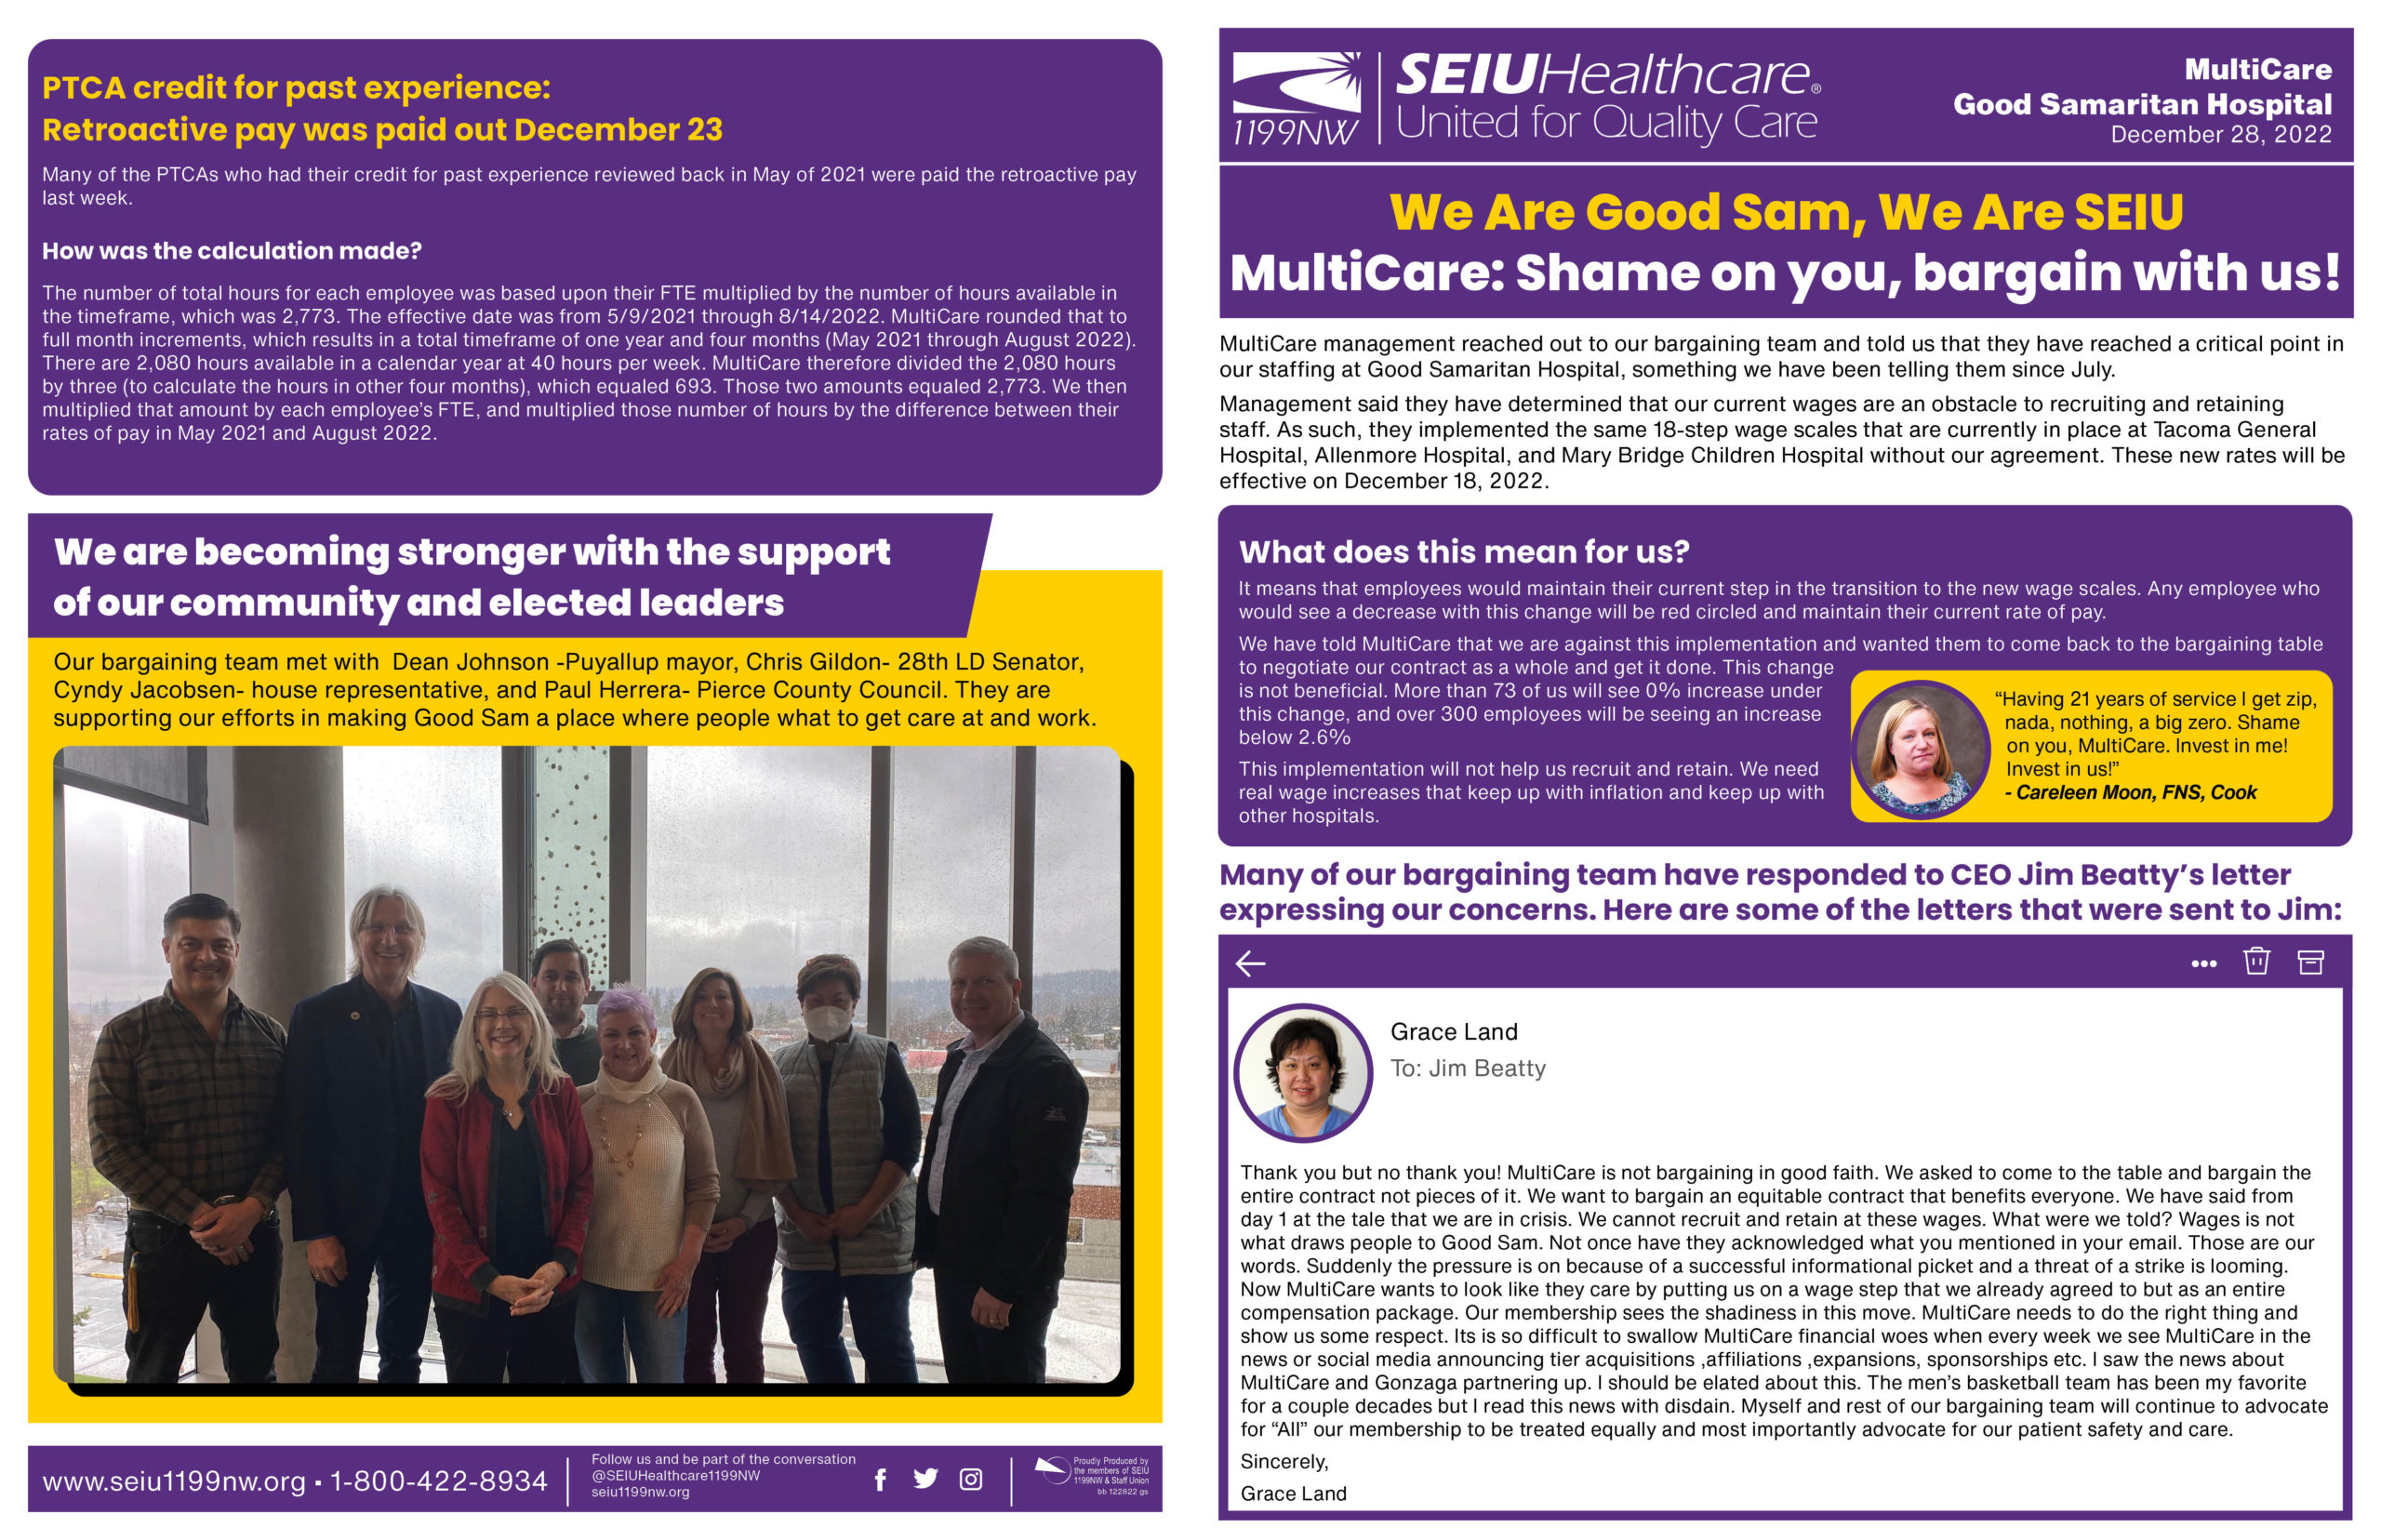 We Are Good Sam, We Are SEIU MultiCare: Shame on you, bargain with us!